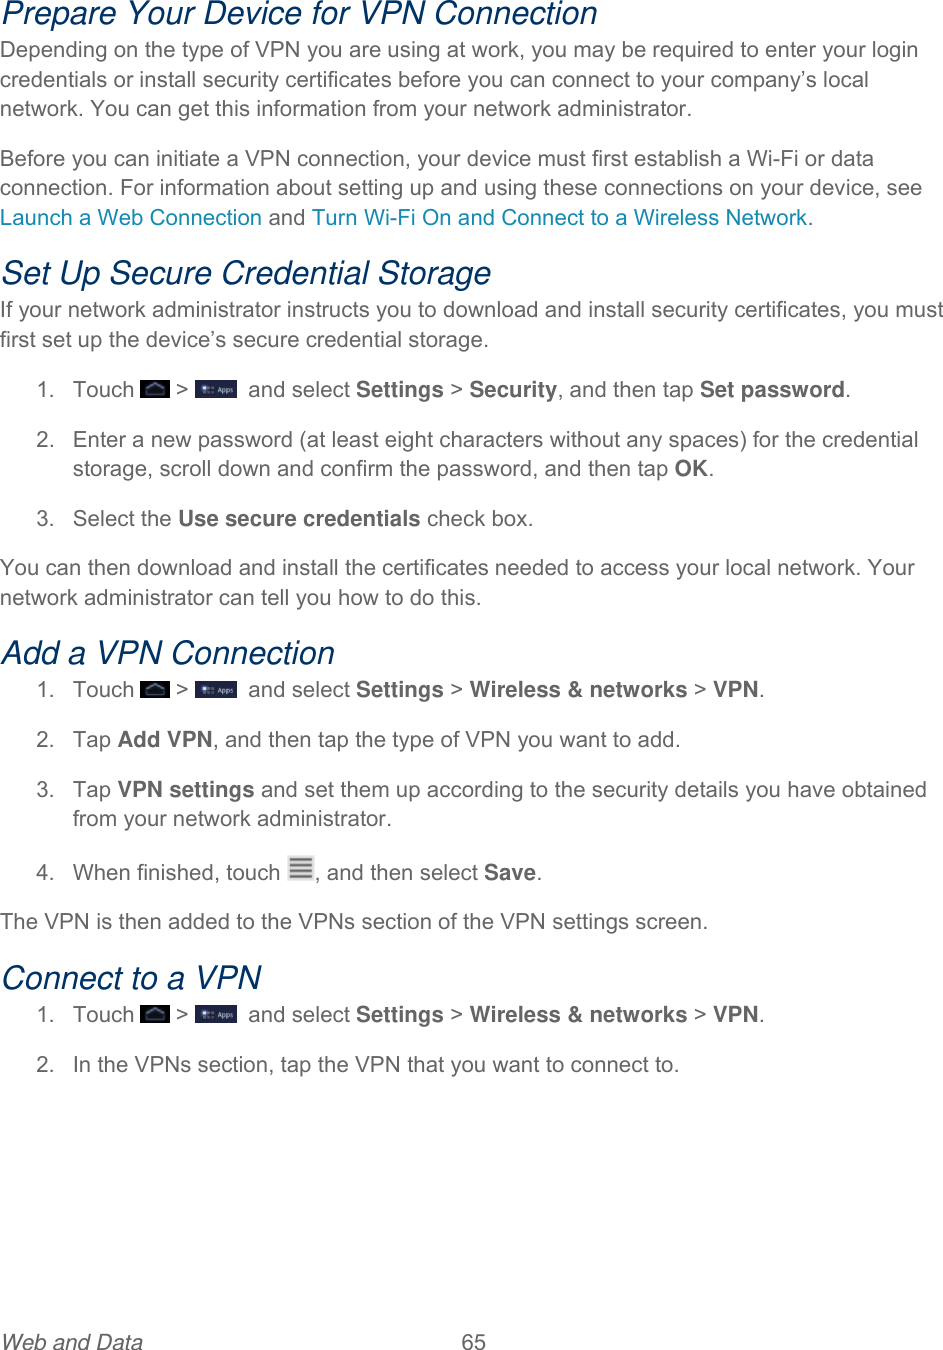 Web and Data  65  Prepare Your Device for VPN Connection Depending on the type of VPN you are using at work, you may be required to enter your login credentials or install security certificates before you can connect to your company’s local network. You can get this information from your network administrator. Before you can initiate a VPN connection, your device must first establish a Wi-Fi or data connection. For information about setting up and using these connections on your device, see Launch a Web Connection and Turn Wi-Fi On and Connect to a Wireless Network. Set Up Secure Credential Storage If your network administrator instructs you to download and install security certificates, you must first set up the device’s secure credential storage. 1. Touch   &gt;    and select Settings &gt; Security, and then tap Set password. 2.  Enter a new password (at least eight characters without any spaces) for the credential storage, scroll down and confirm the password, and then tap OK. 3. Select the Use secure credentials check box. You can then download and install the certificates needed to access your local network. Your network administrator can tell you how to do this. Add a VPN Connection 1. Touch   &gt;    and select Settings &gt; Wireless &amp; networks &gt; VPN. 2. Tap Add VPN, and then tap the type of VPN you want to add. 3. Tap VPN settings and set them up according to the security details you have obtained from your network administrator. 4.  When finished, touch  , and then select Save. The VPN is then added to the VPNs section of the VPN settings screen. Connect to a VPN 1. Touch   &gt;    and select Settings &gt; Wireless &amp; networks &gt; VPN. 2.  In the VPNs section, tap the VPN that you want to connect to. 